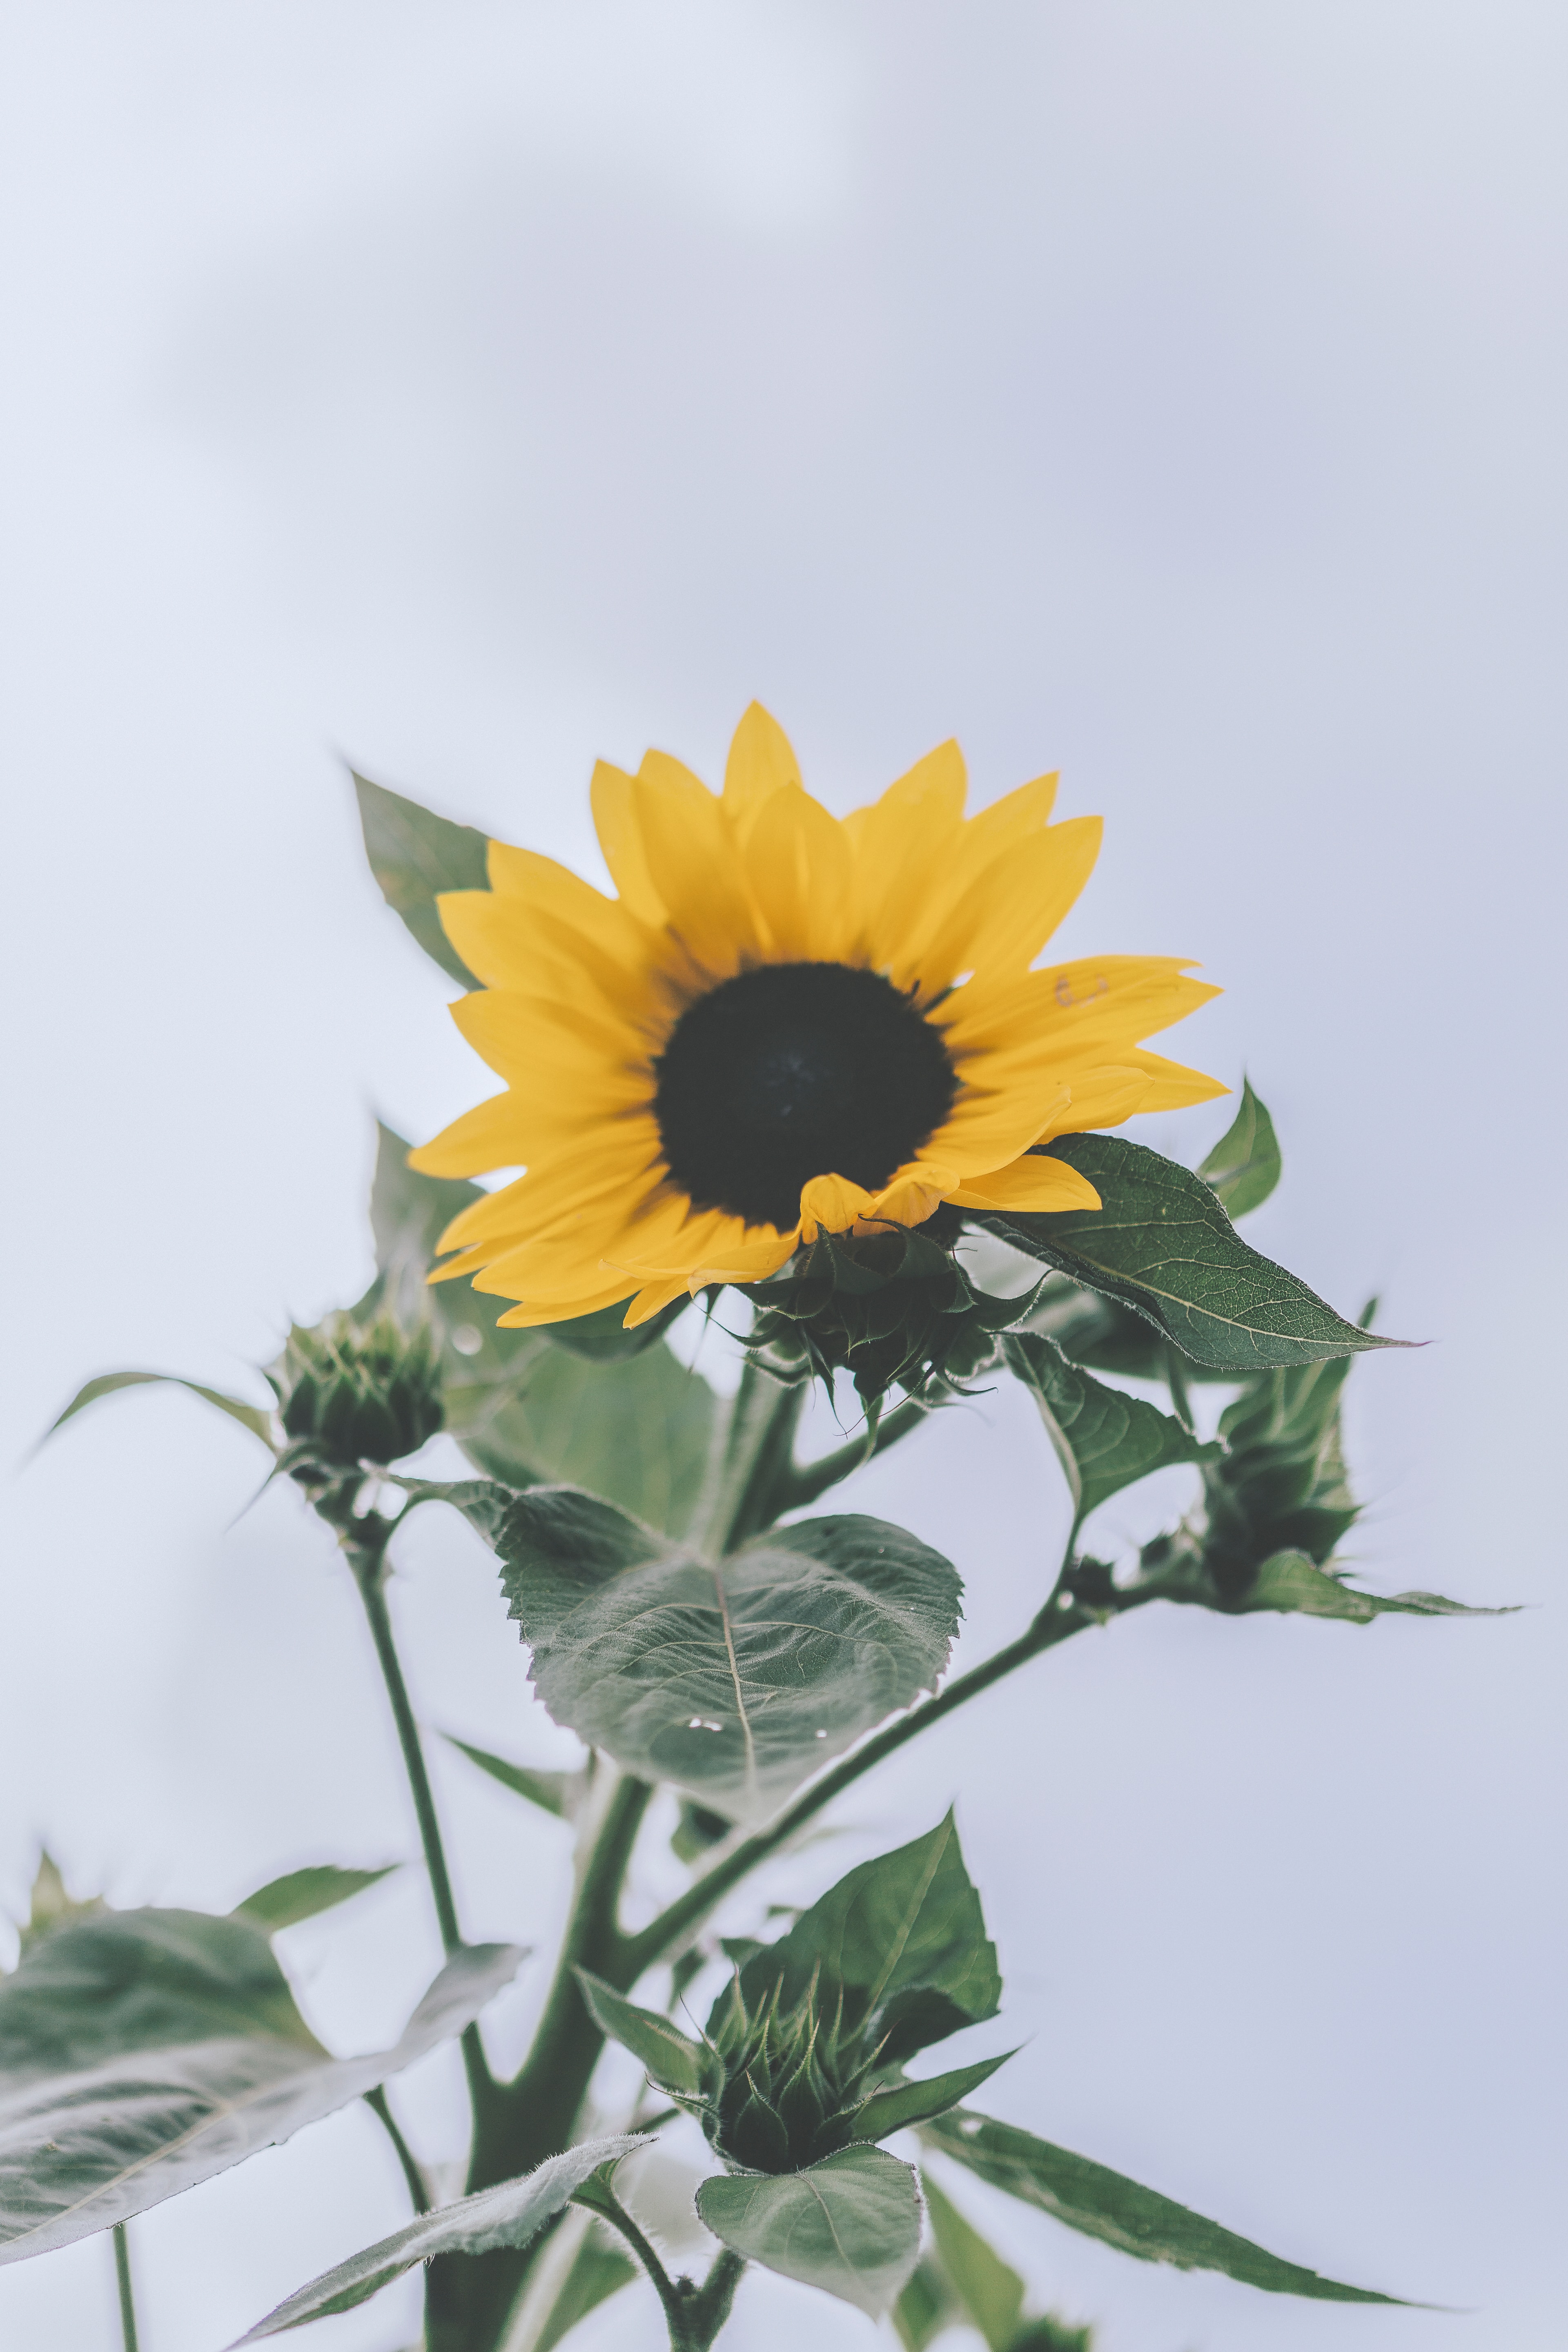 Free Images plant, bloom, yellow, flowers Sunflower